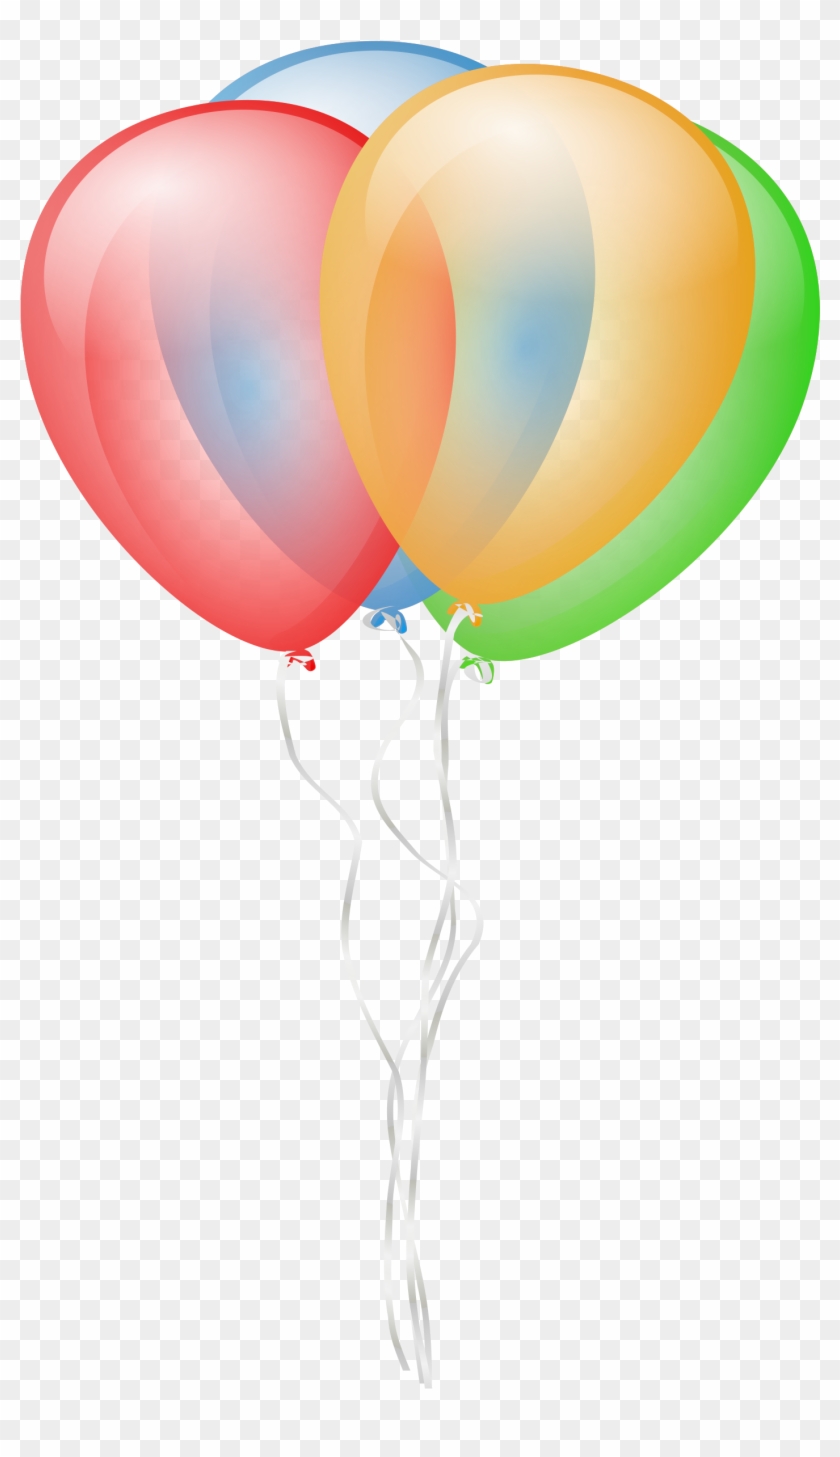 Transparent Multi Color Balloons Png Picture Clipart - Balloons Clip Art #5524345